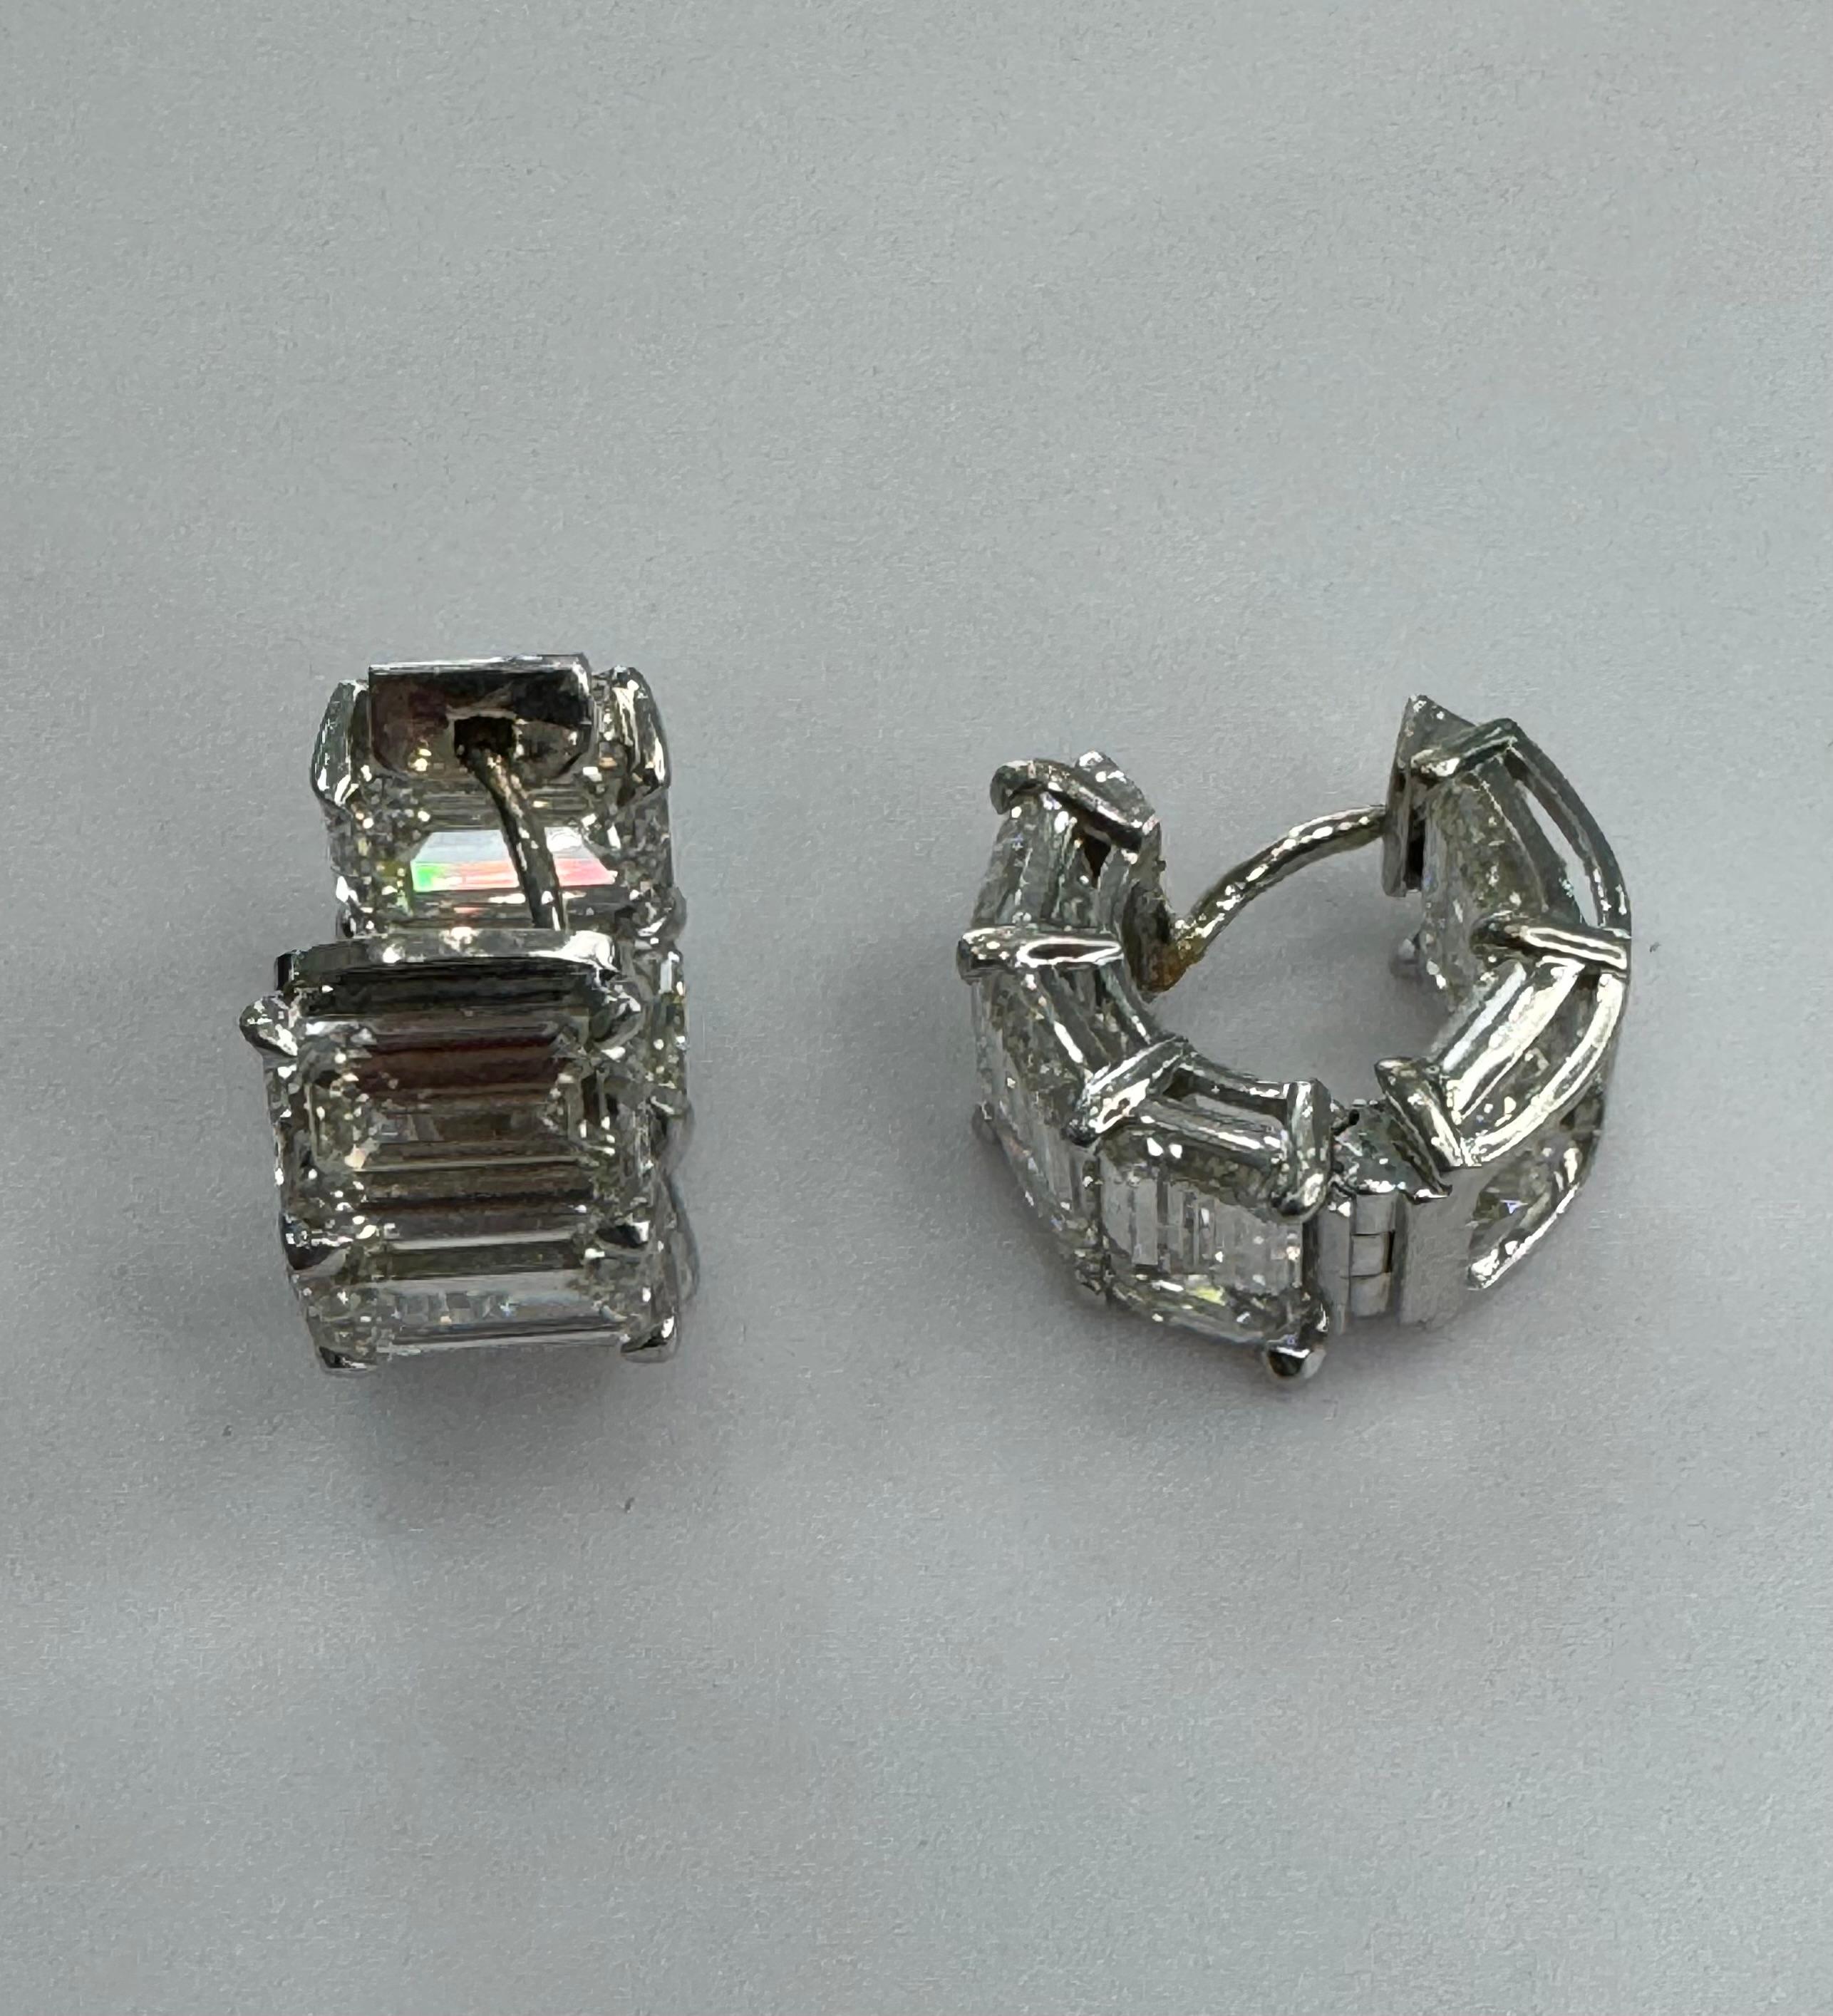 GIA Certified 10 Carat Emerald Cut Diamond Huggie Earrings. Crafted in 18k White Gold, these earrings feature 10 Emerald Cut Diamonds each over 1 carat, in G/H VS-SI1 Clarity. Each stone comes with its own GIA Certificate showing its Clarity and